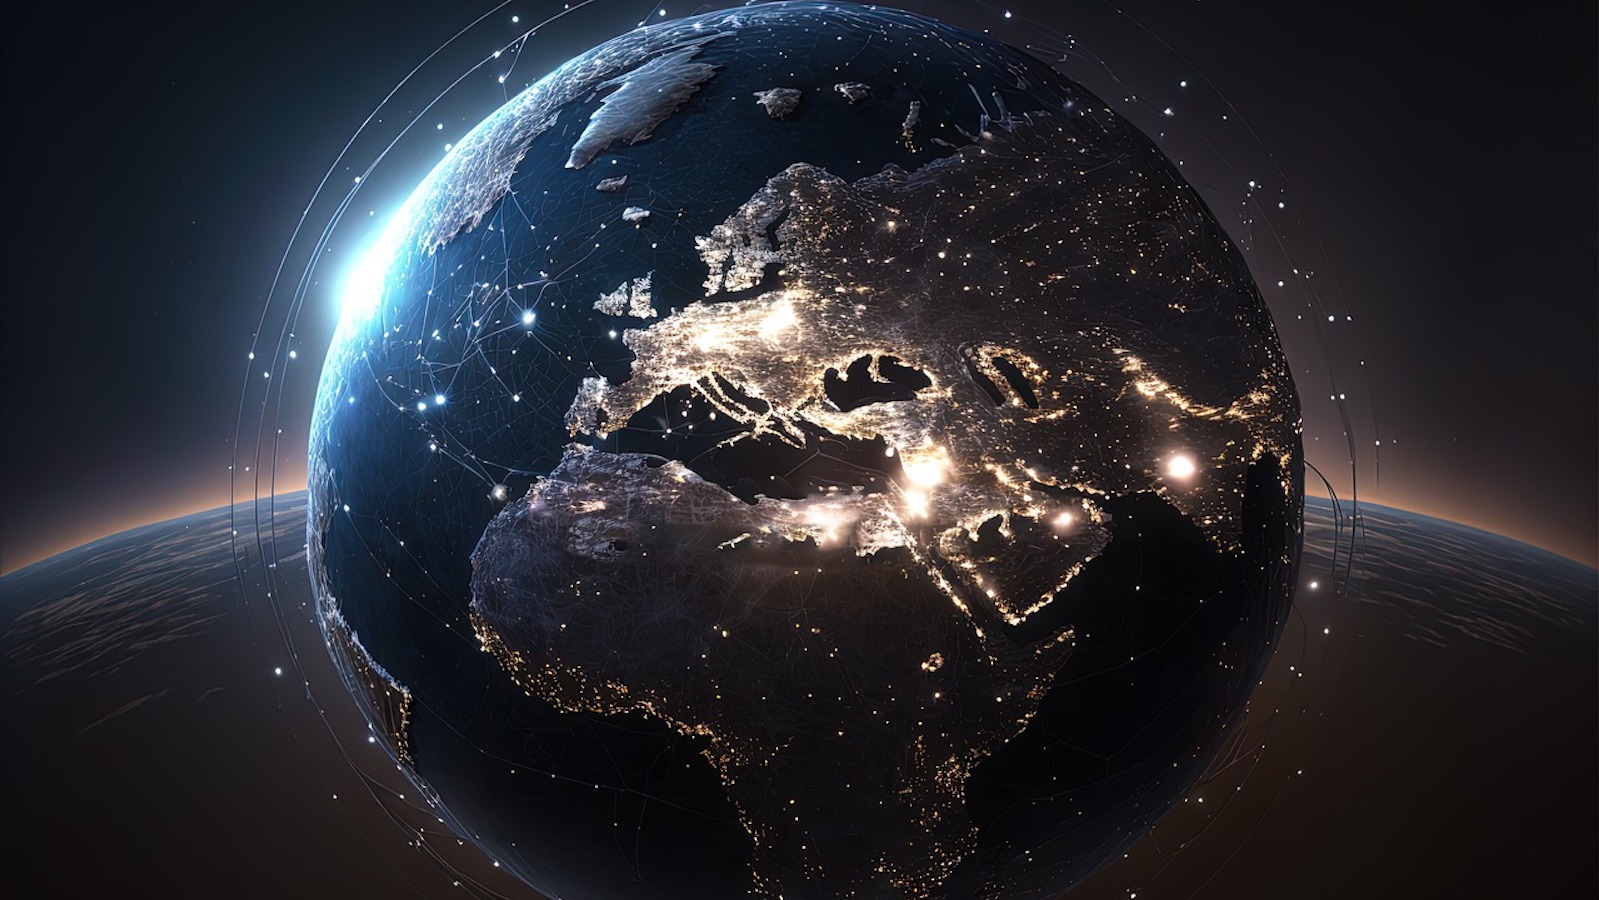 Outer space view of Earth partially lit up and with lines across the globe indicating connectedness